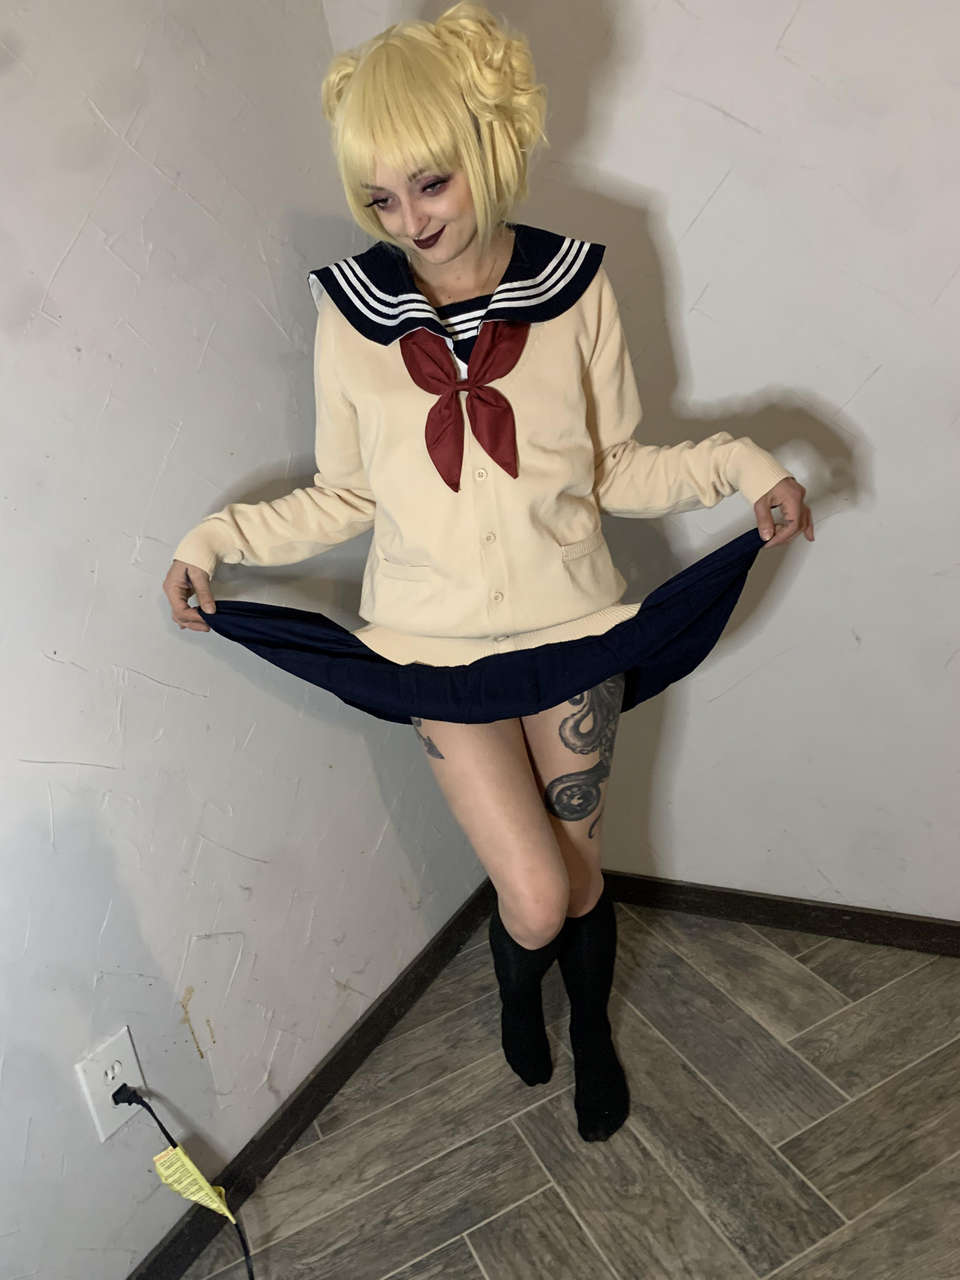 Himiko Toga First Cosplay Ever Lmk What You Thin